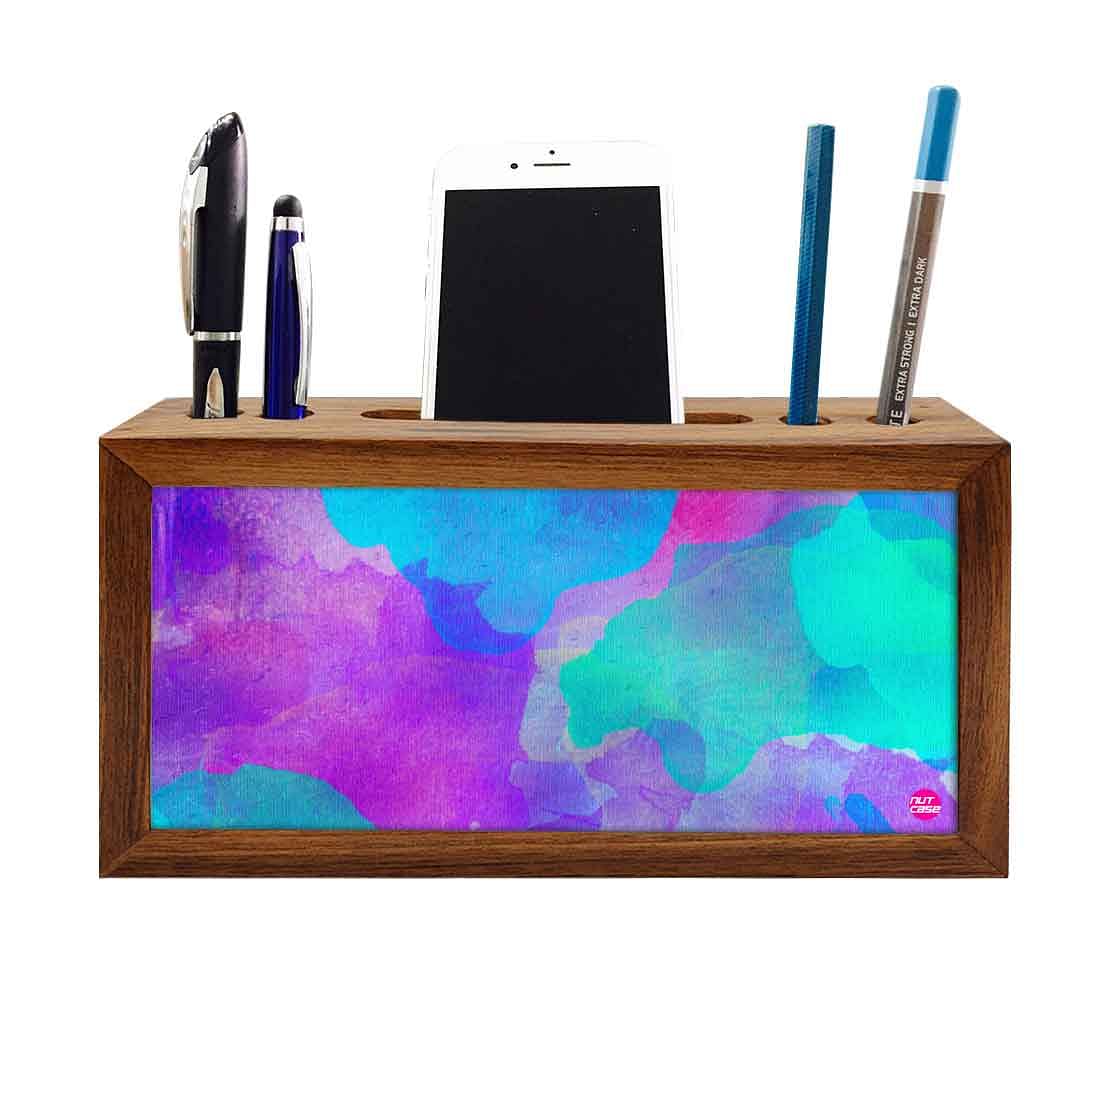 Pen and Mobile Stand Desk Organizer for Office - Watercolors Pink & Blue Nutcase